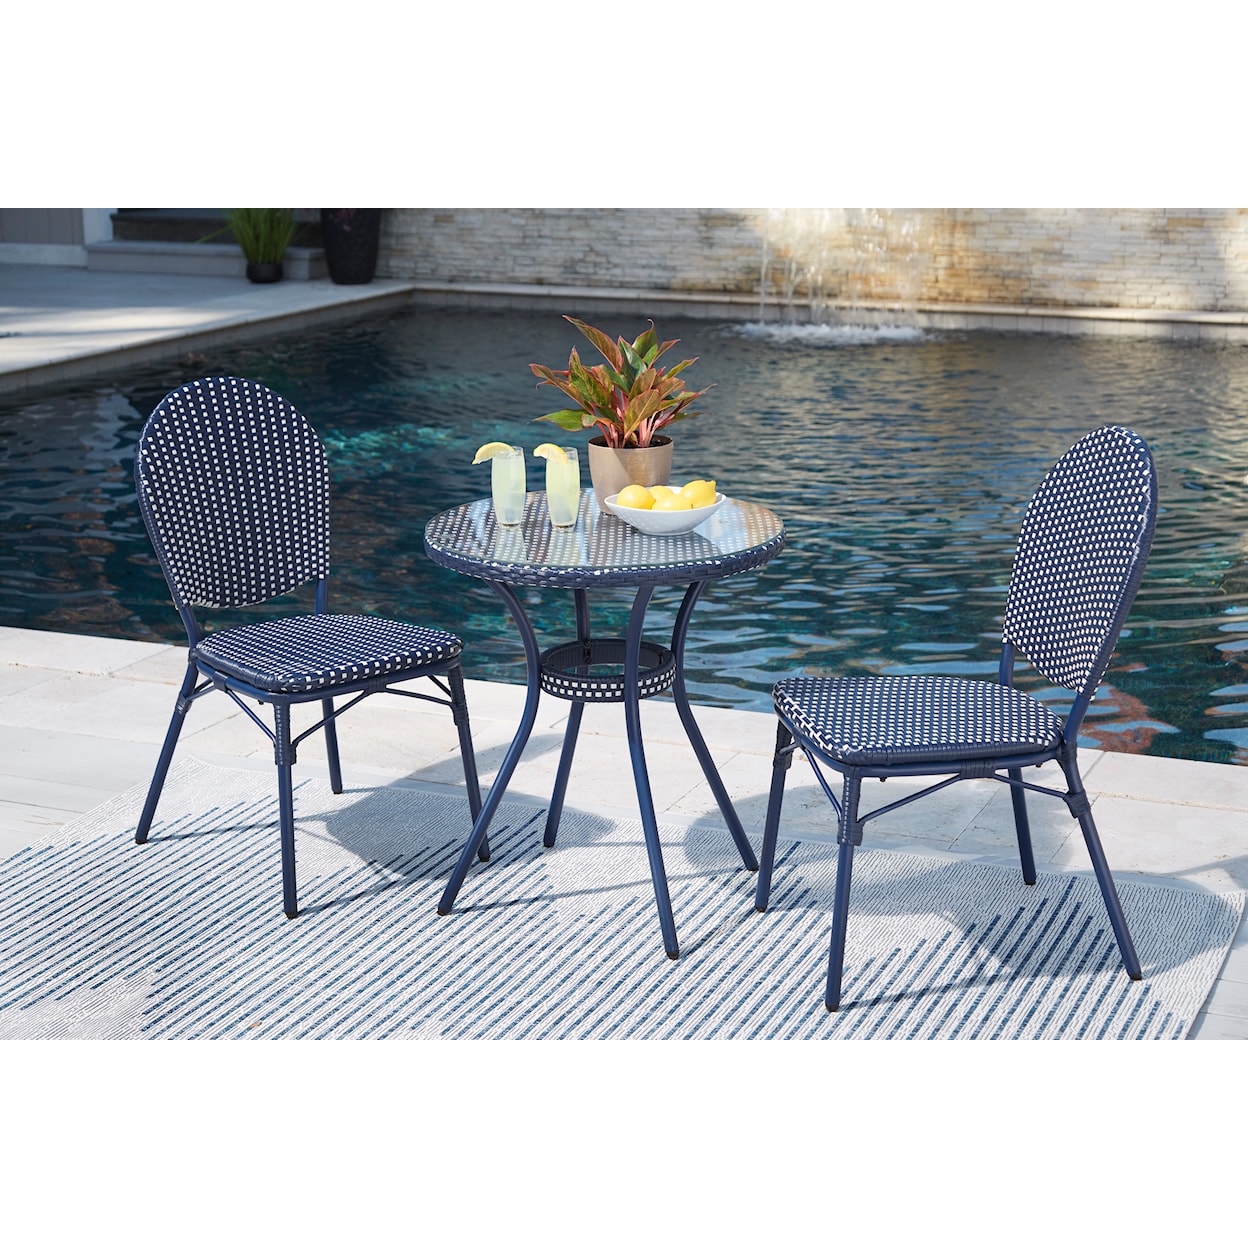 Ashley Furniture Signature Design Odyssey Blue Outdoor Table and Chairs (Set of 3)